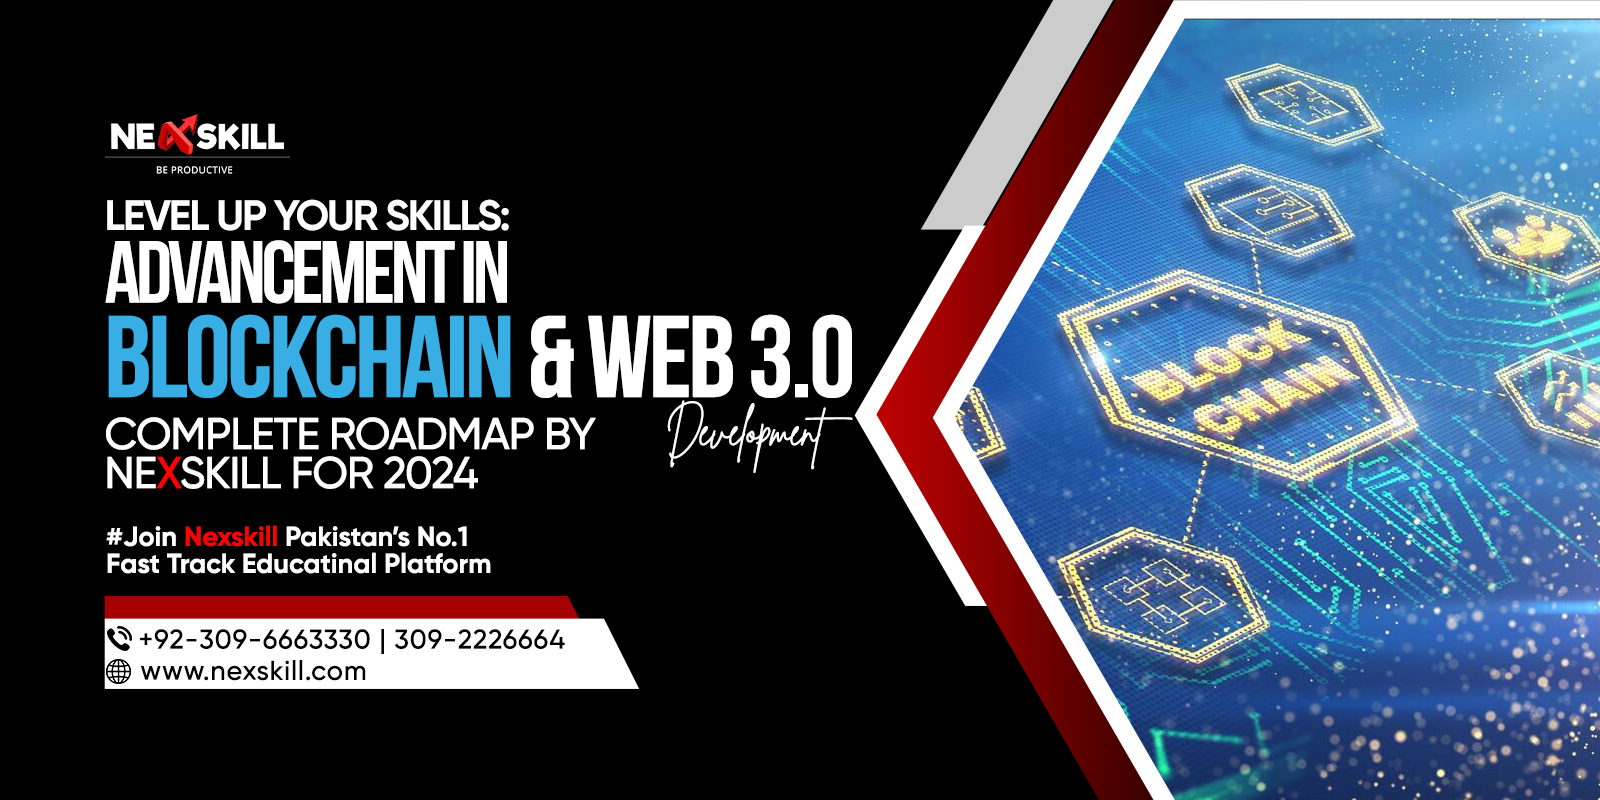 Level Up Your Skills: Advancement in Blockchain & Web 3.0 Development, Complete Roadmap by Nexskill for 2024